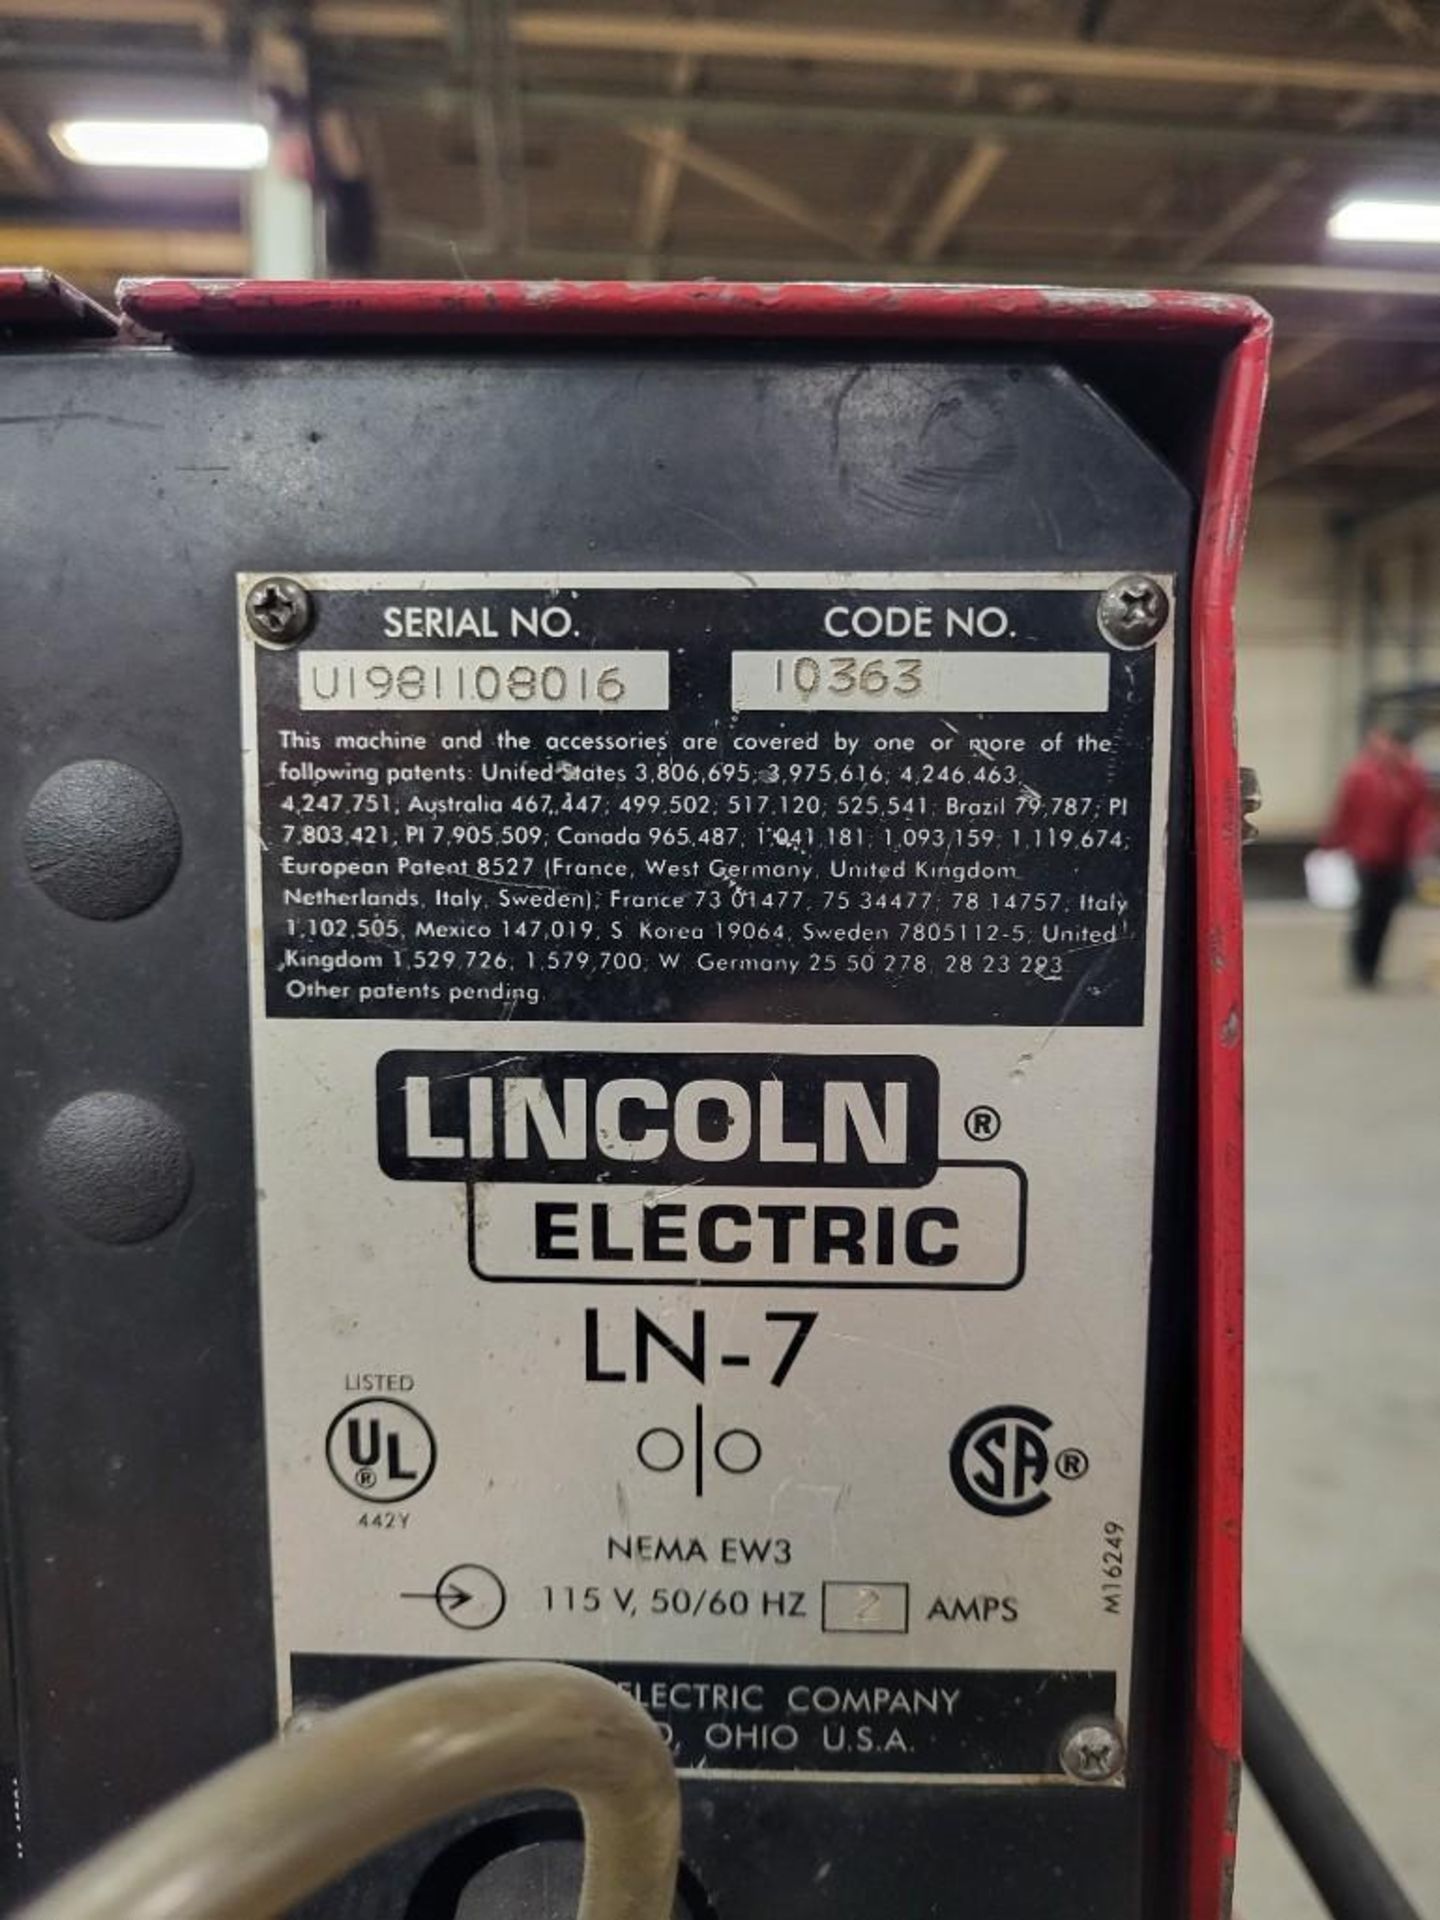 LINCOLN ELECTRIC CV-300 MIG WELDER WITH LN-7 WIRE FEEDER - Image 8 of 8